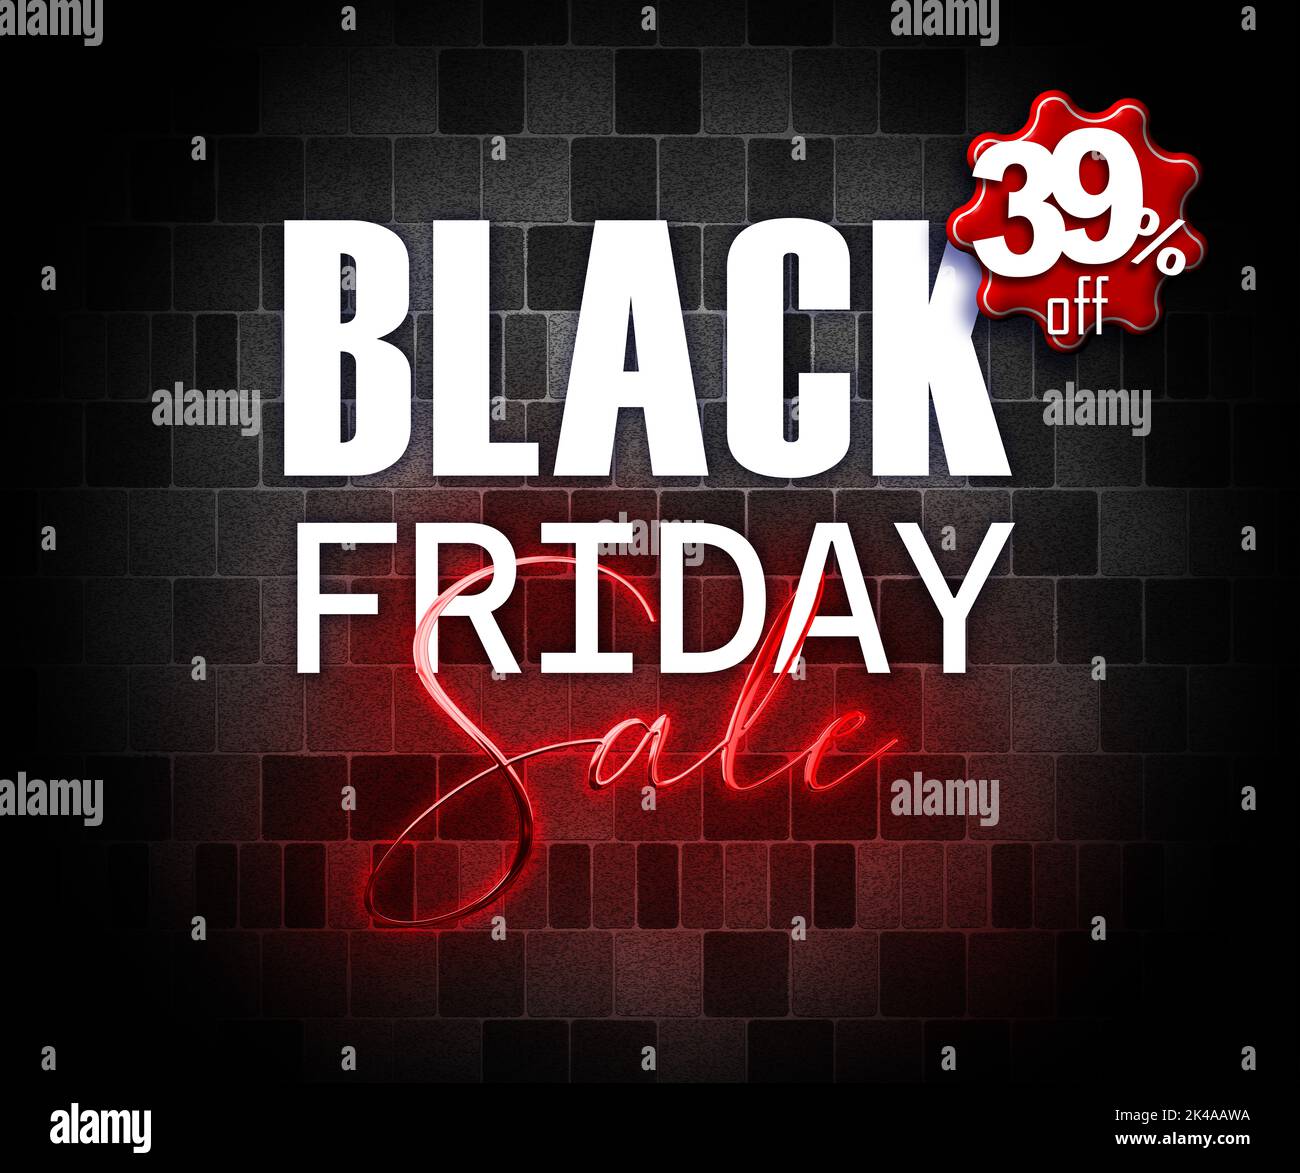 illustration with 3d elements black friday promotion banner 39 percent off sales increase Stock Photo